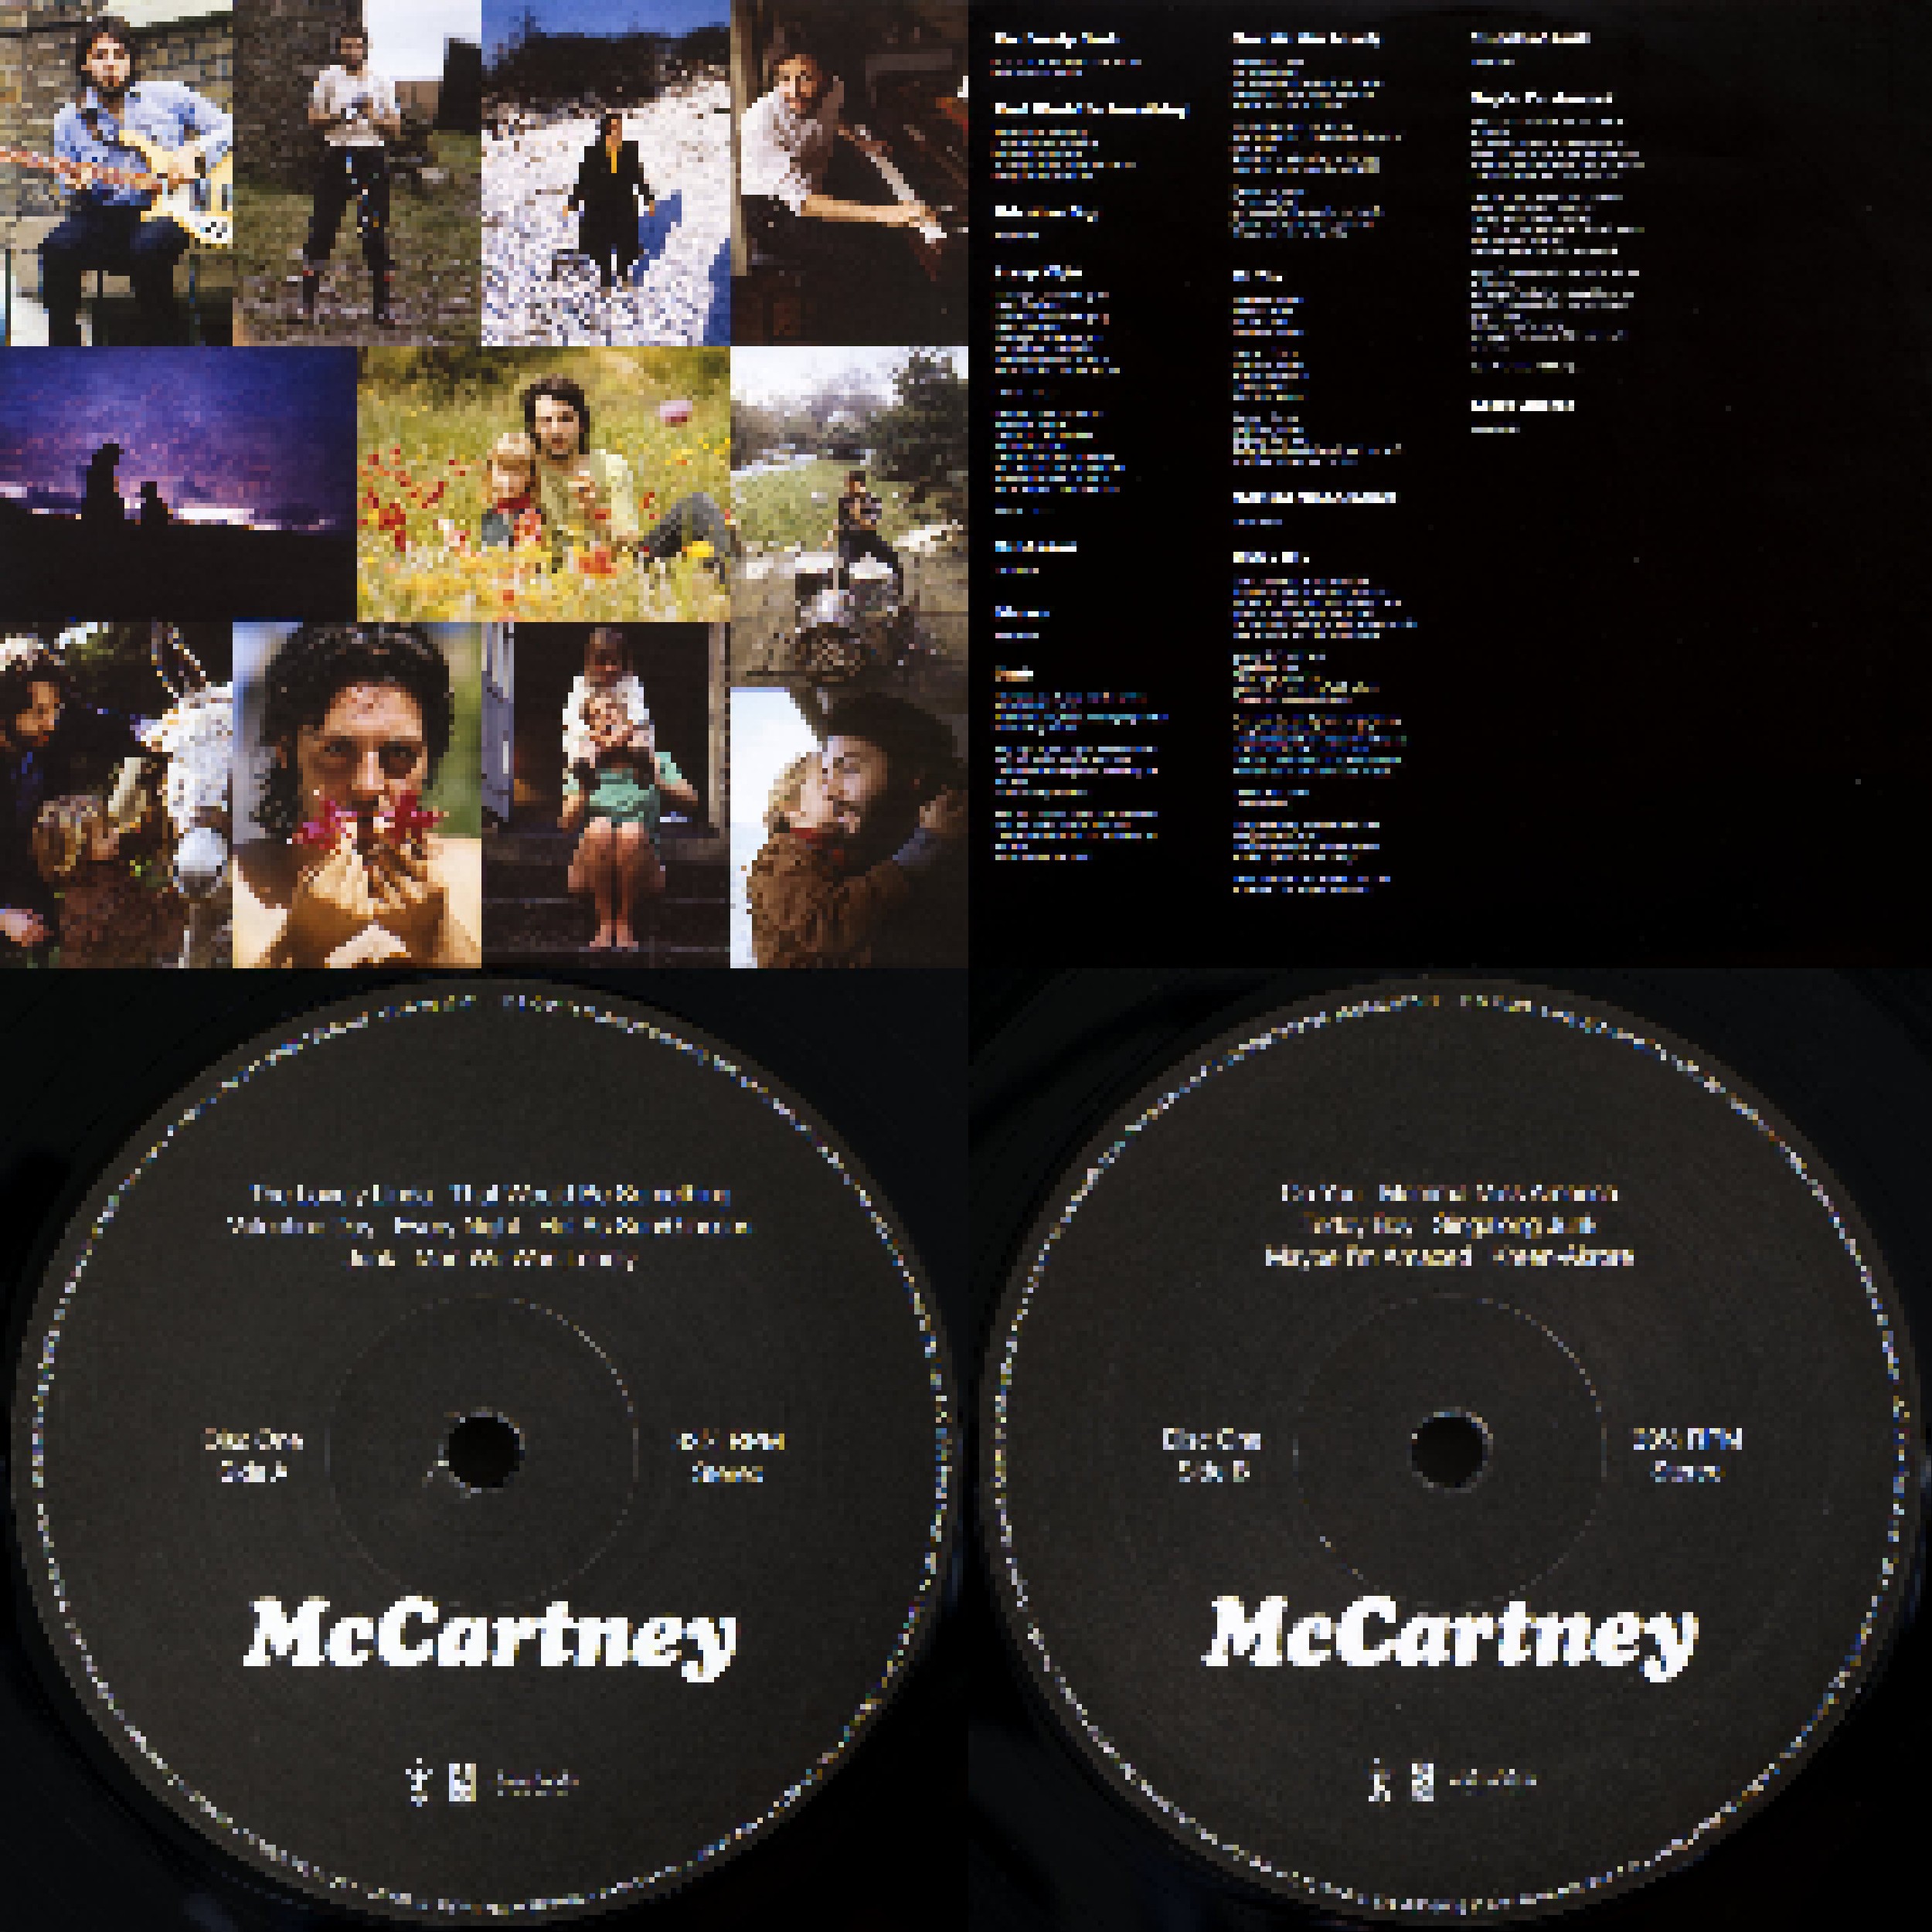 PAUL McCARTNEY: “HOME TONIGHT” / “IN A HURRY” TWO BRAND NEW SONGS OUT NOW